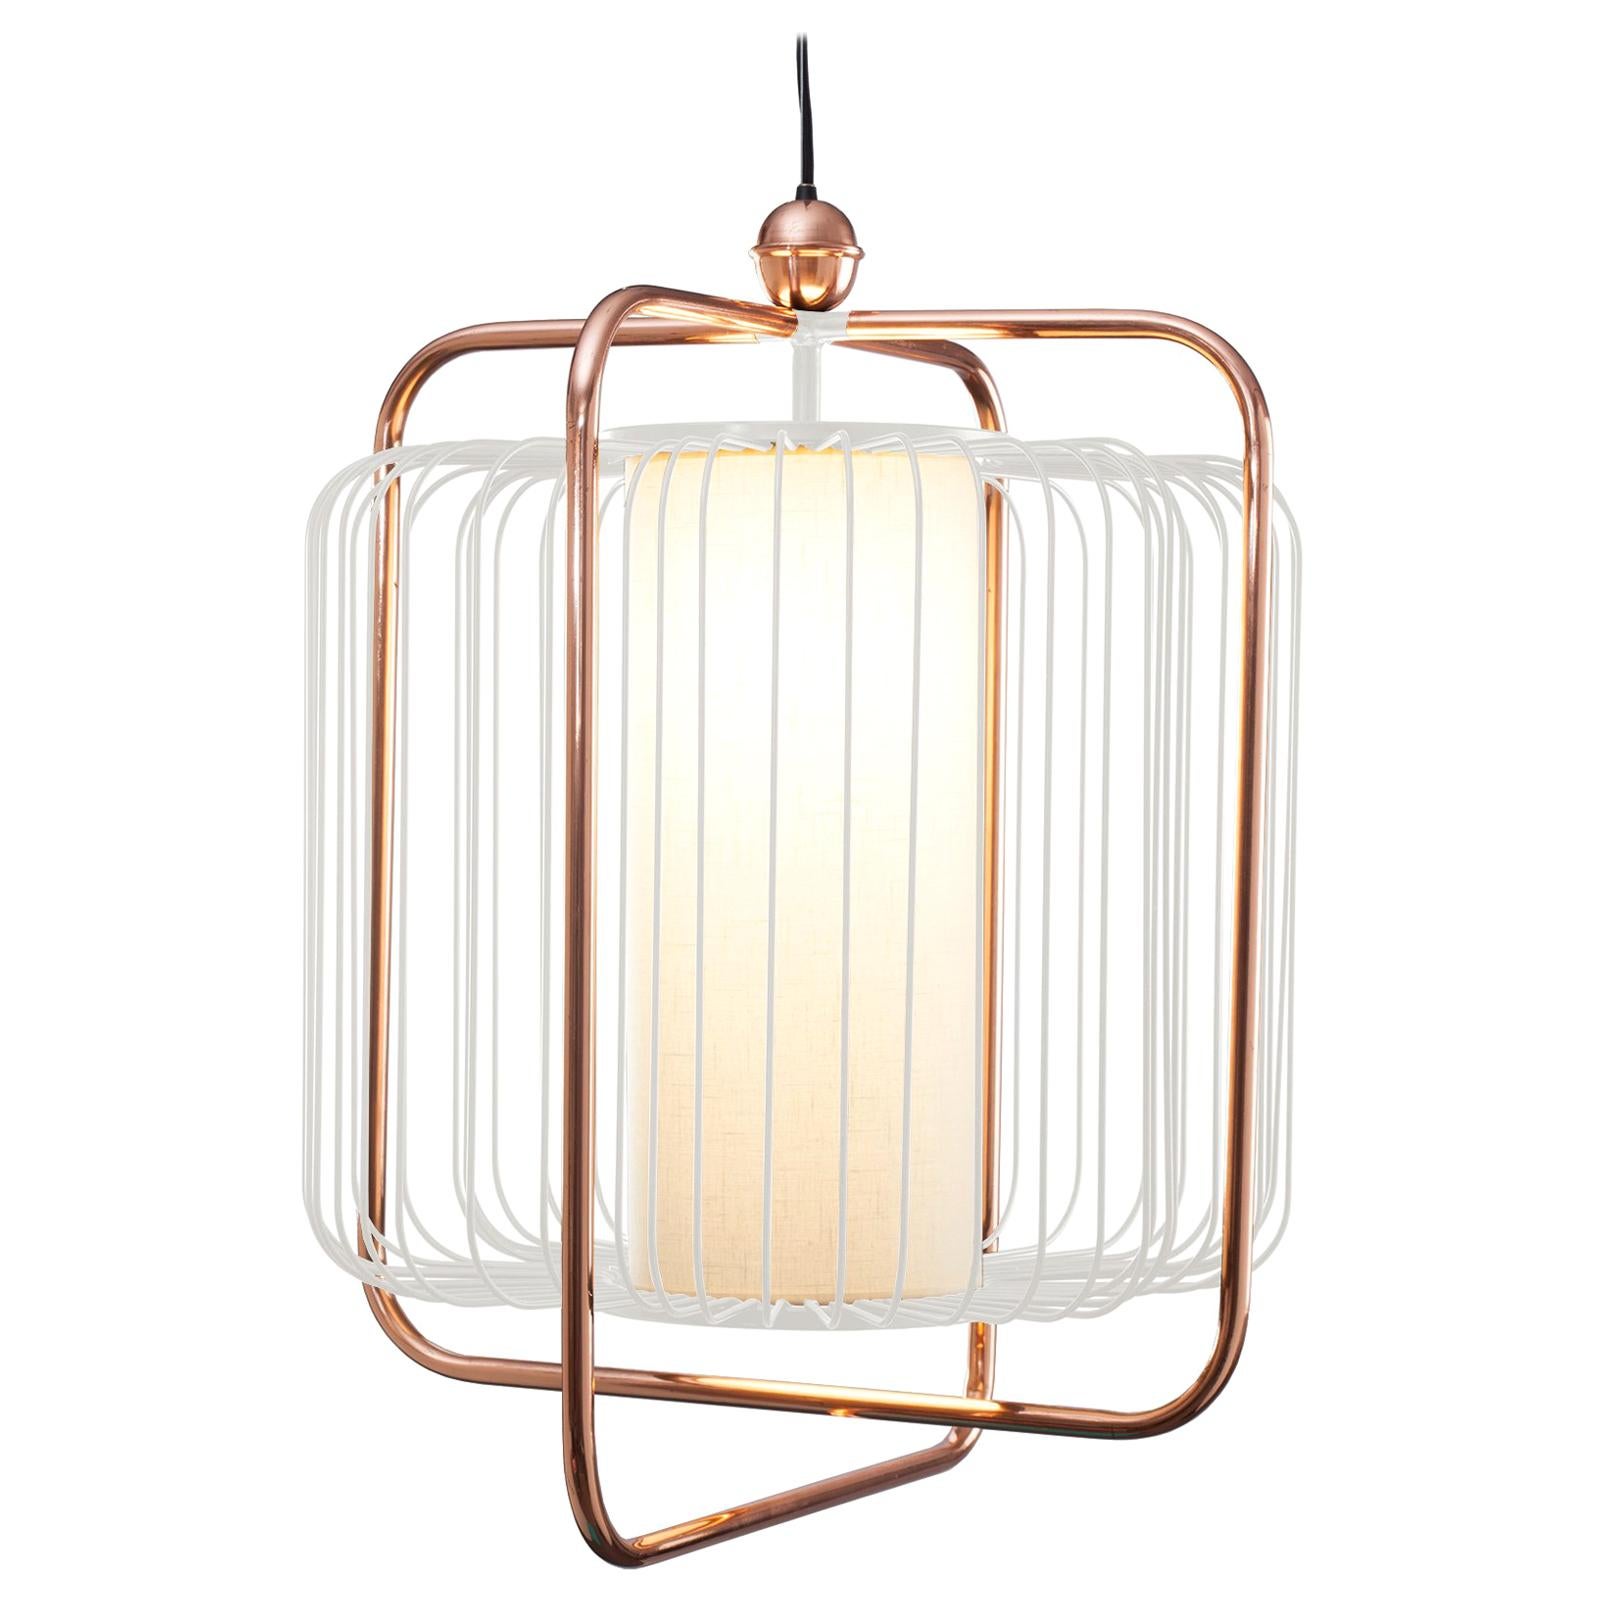 Contemporary Art Deco inspired Jules Pendant Lamp in Copper, Ivory and Linen